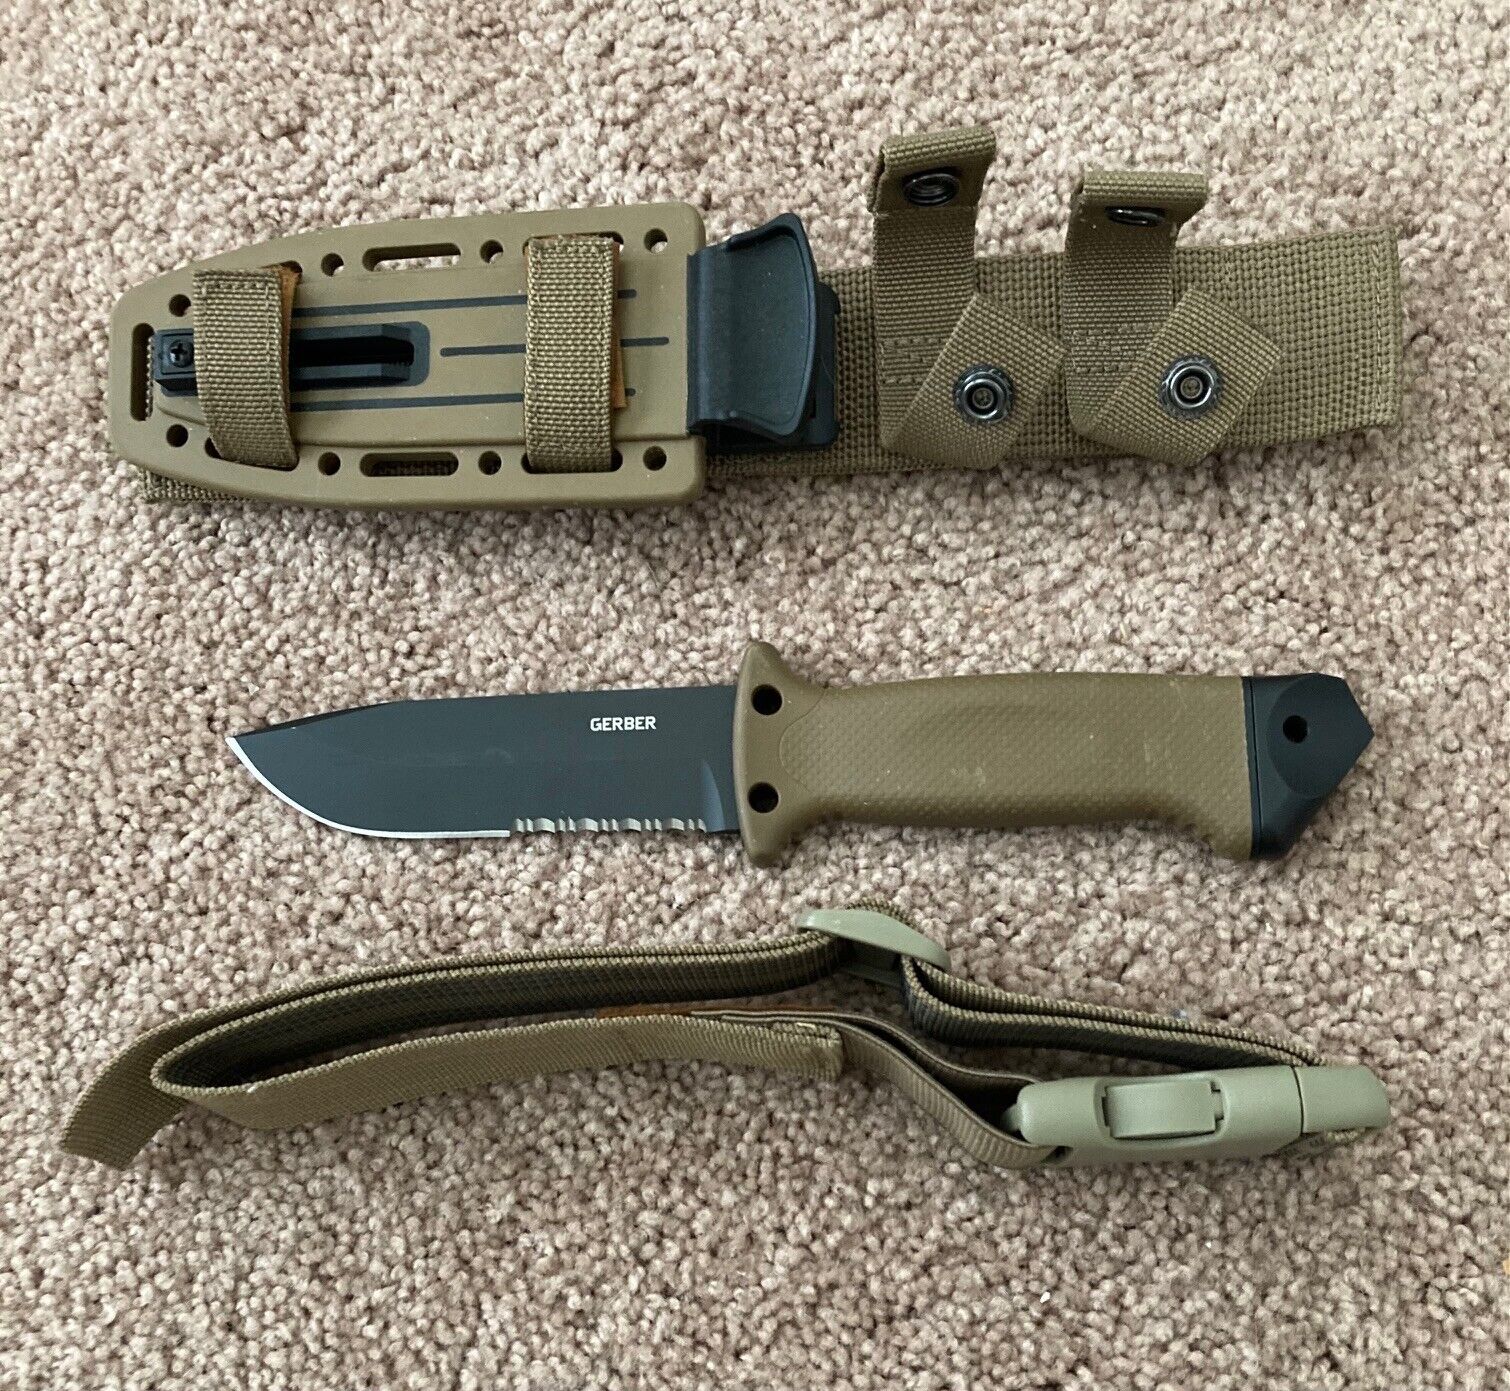 Brand New Gerber LMF II Knife With Sheath, Sharpener, and Strap